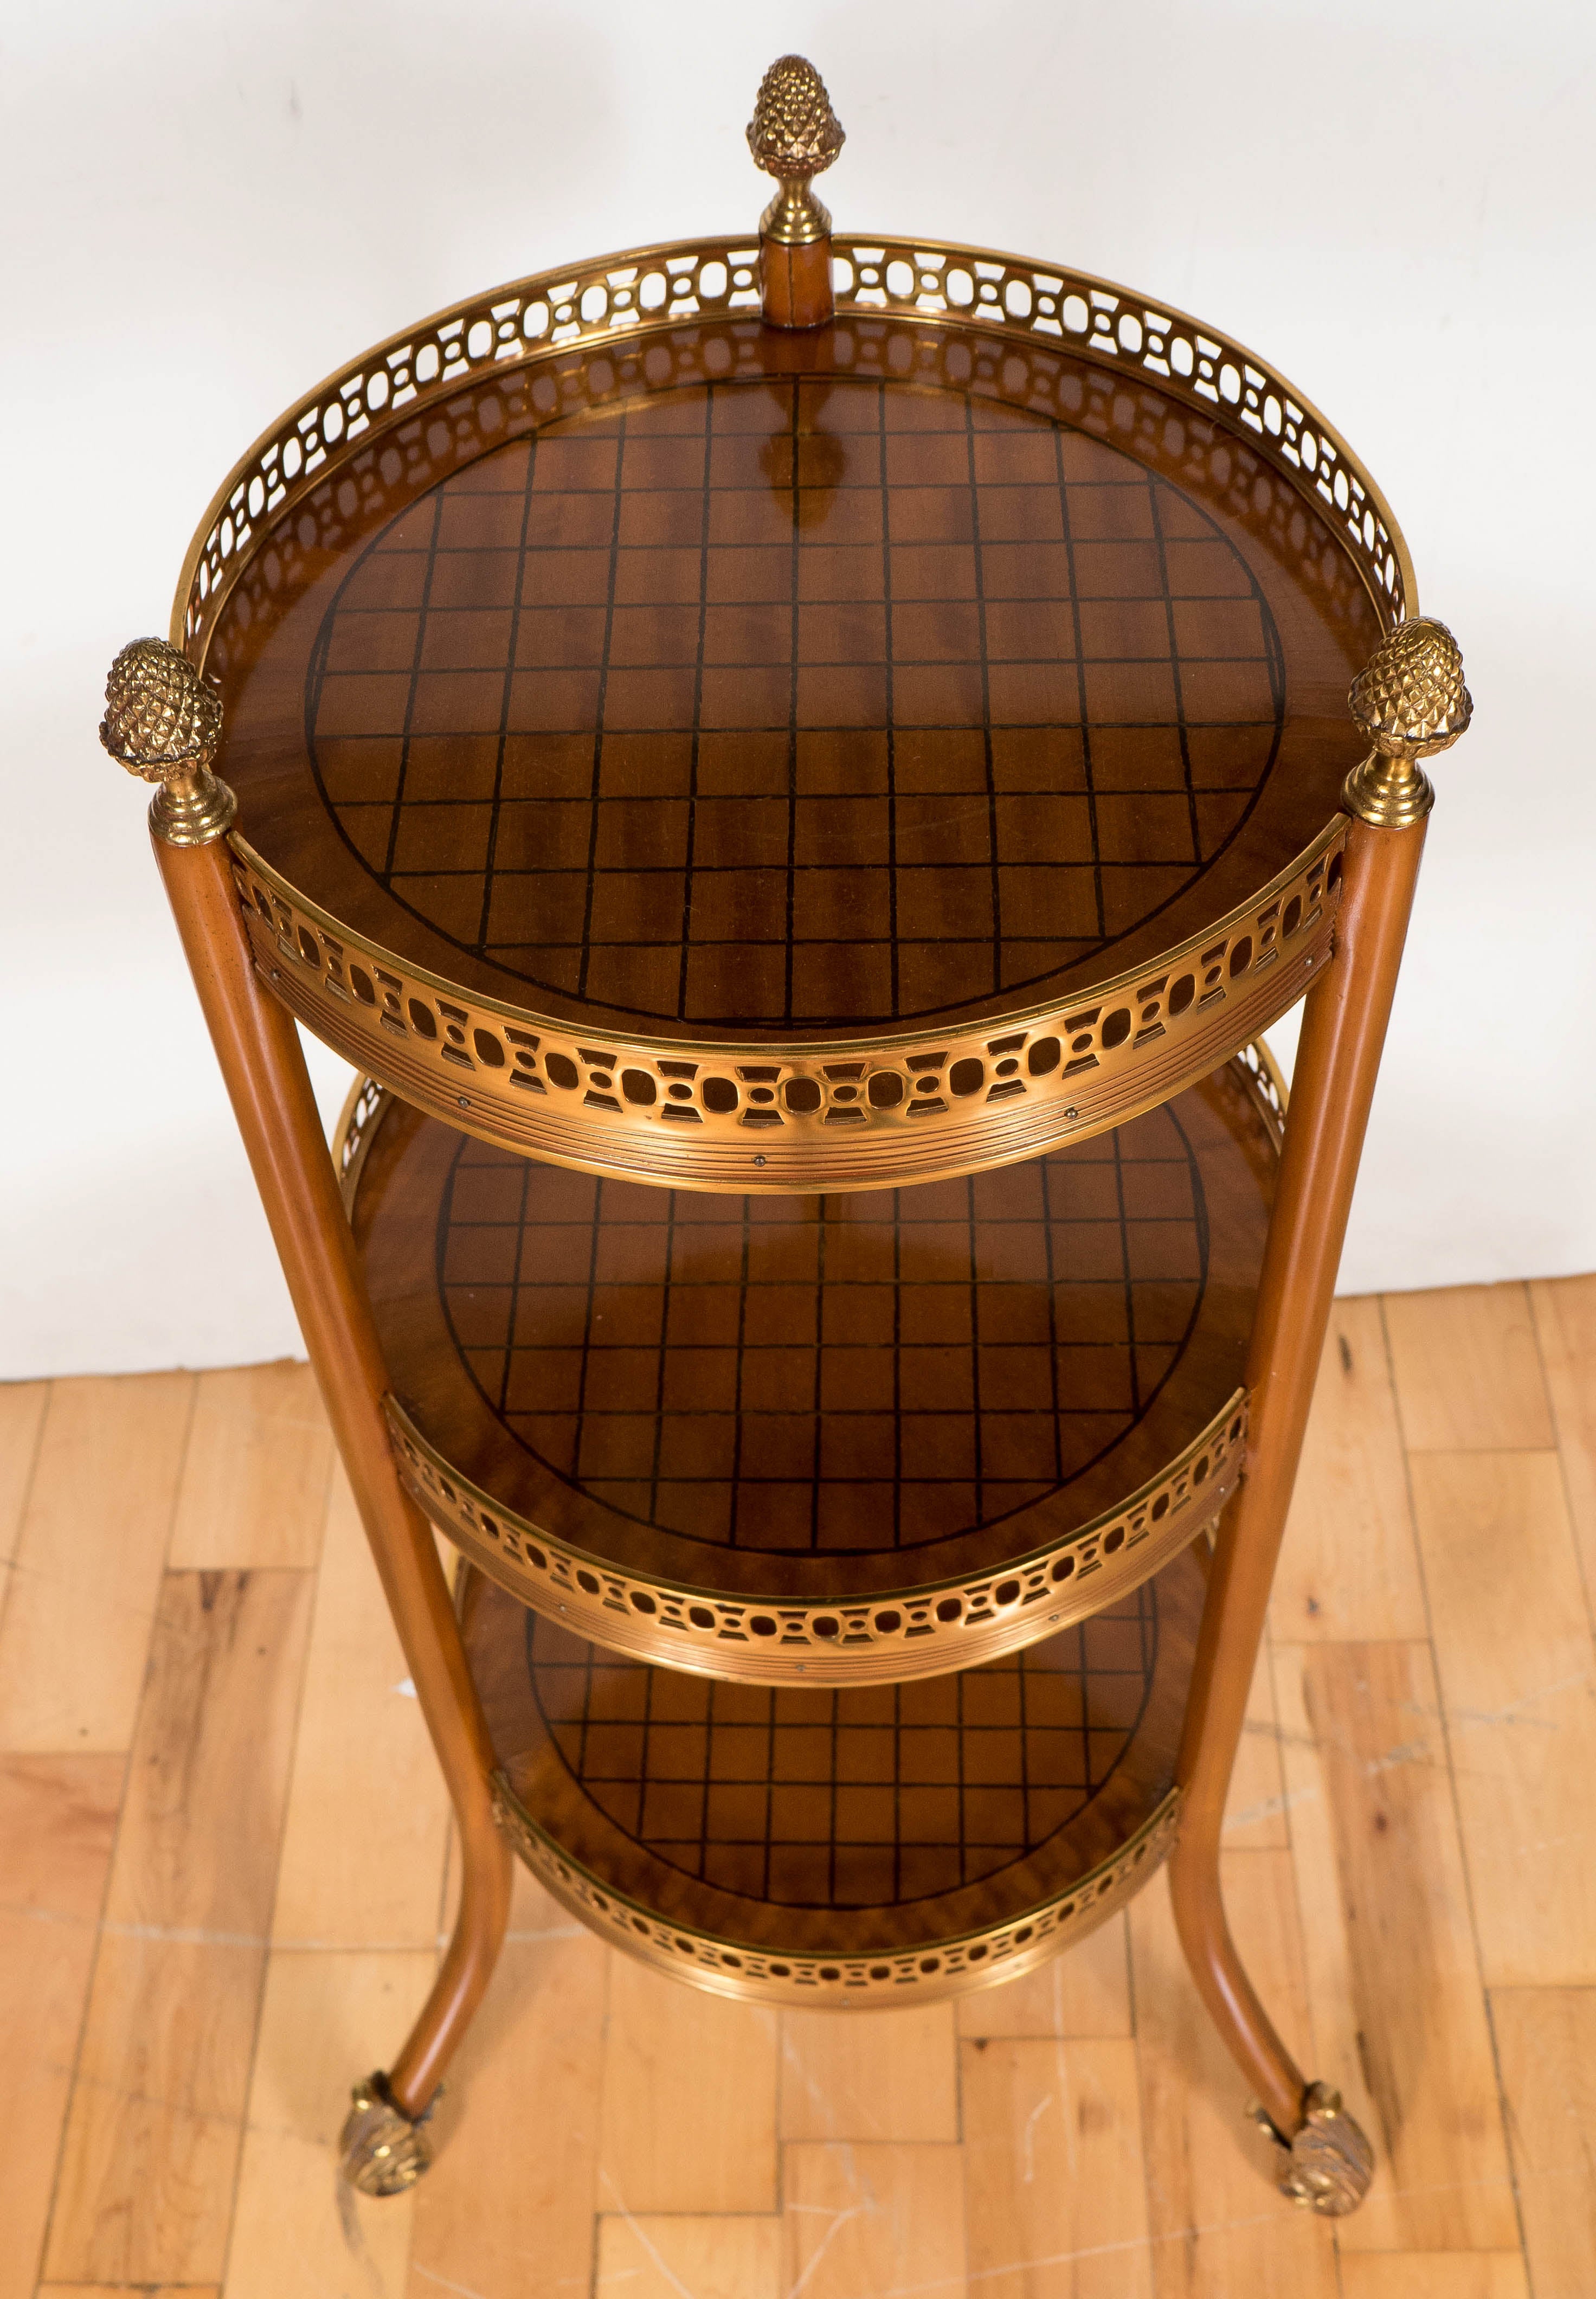  Elegant Three-Tiered Table in Amboyna Wood with Gilded Brass Cage and Accent 1